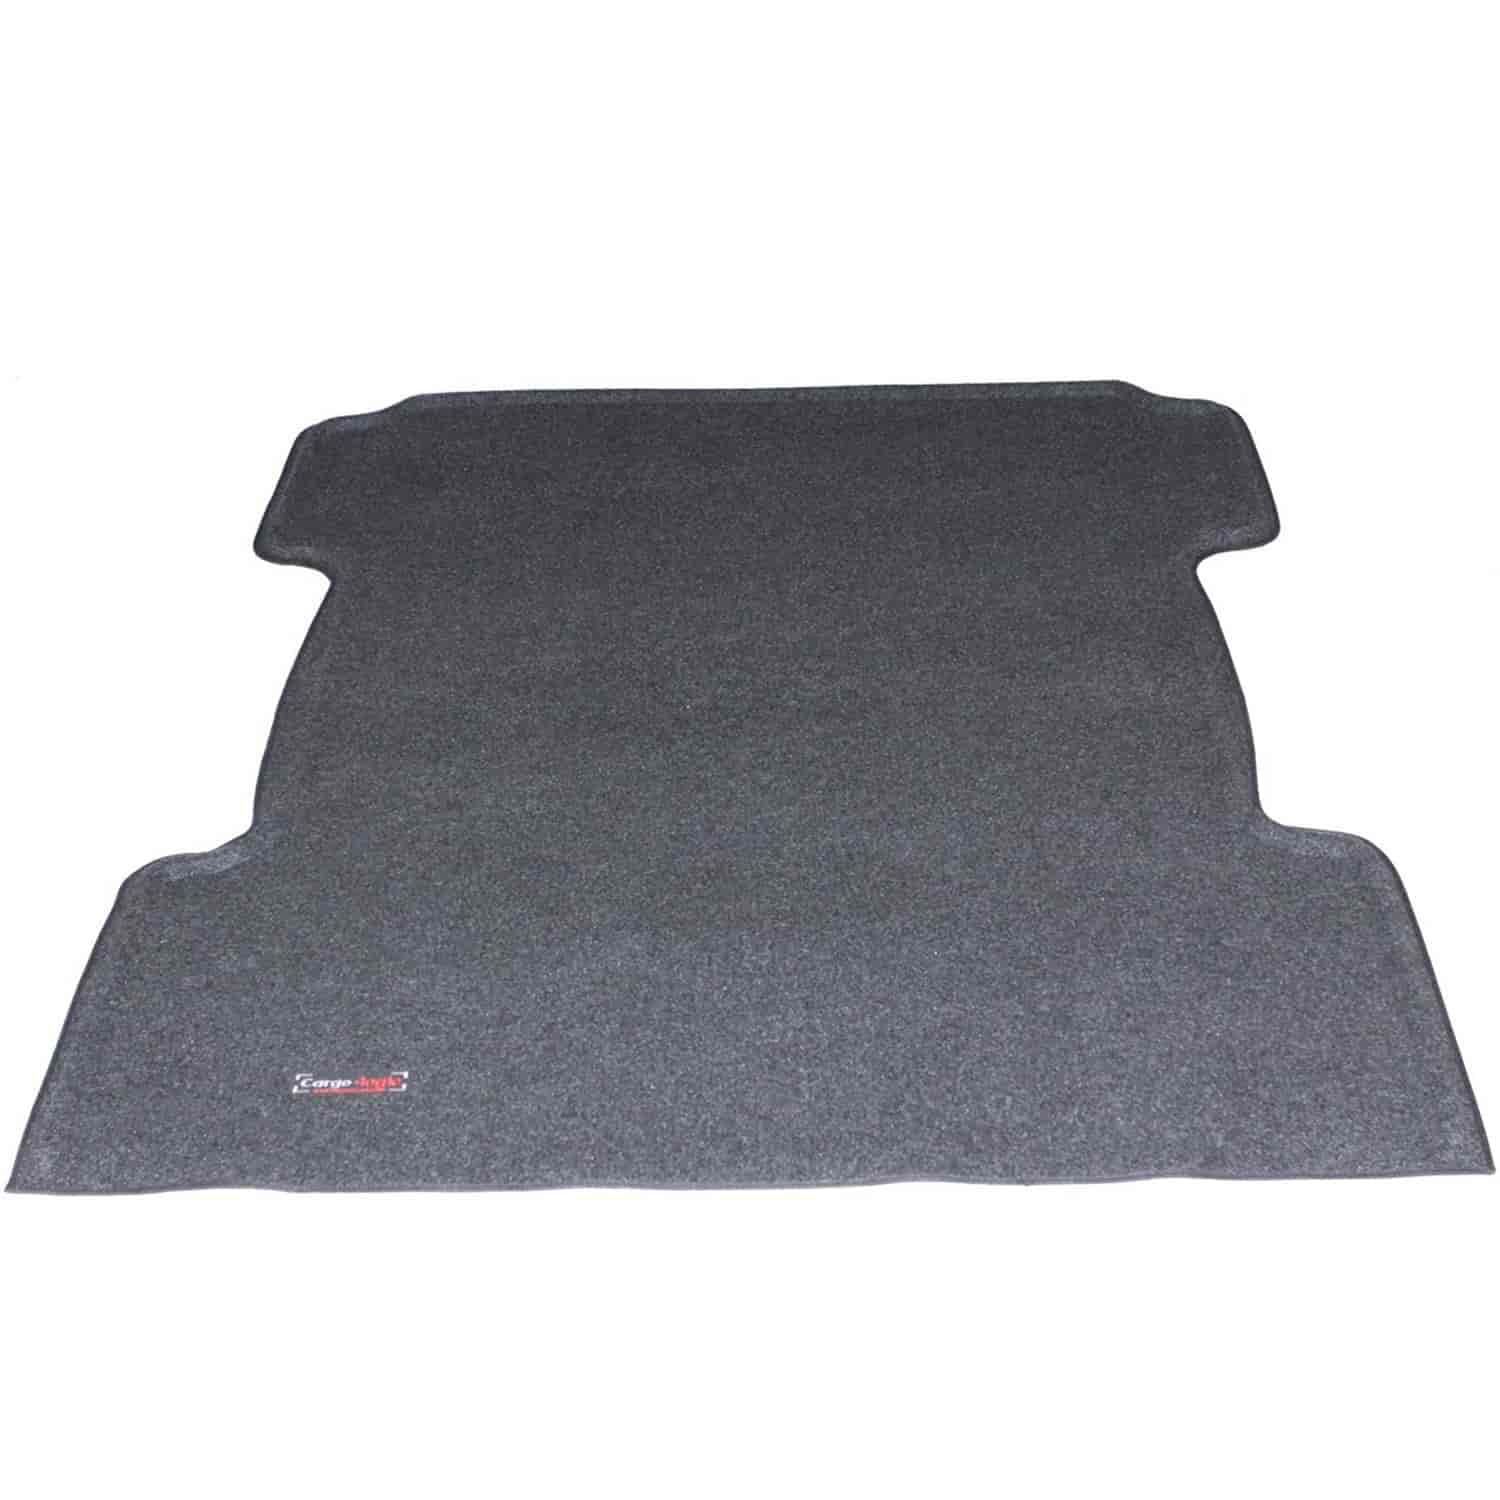 Cargo Logic Truck Bed Liner for 2007-2011 Toyota Tundra Standard Bed